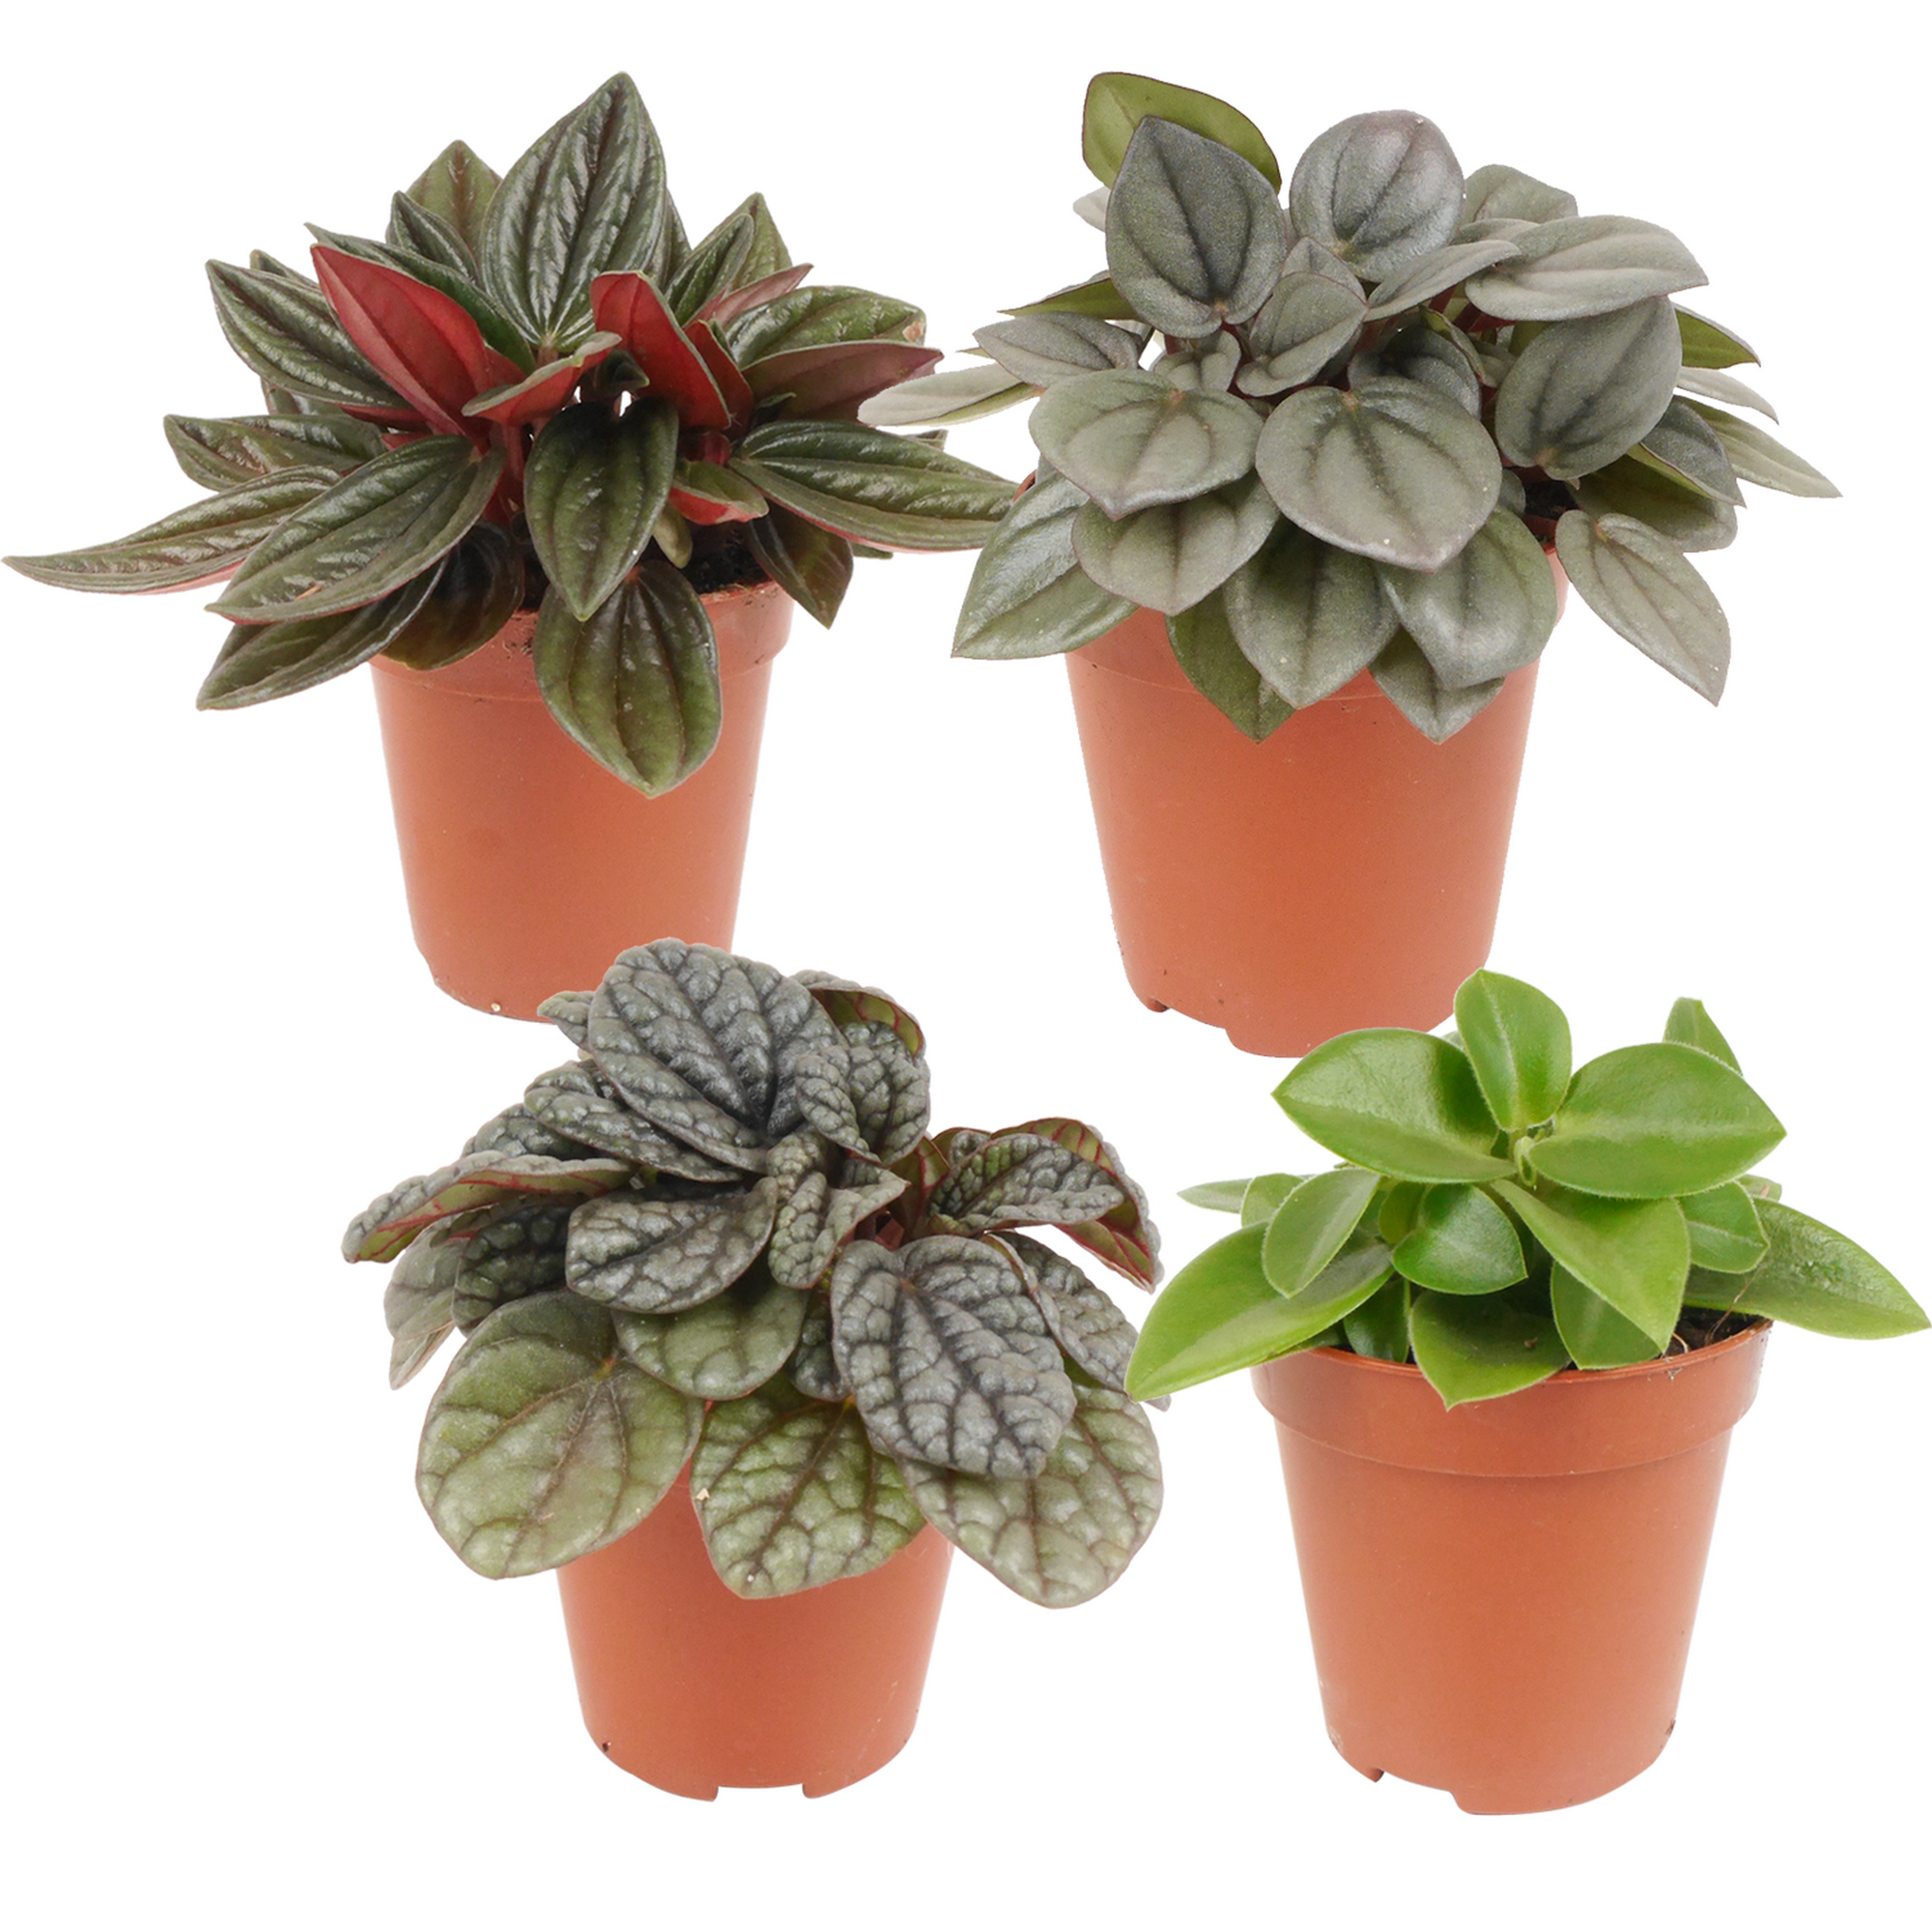 Peperomia-Mix 6 cm Topf, 4er-Set + product picture